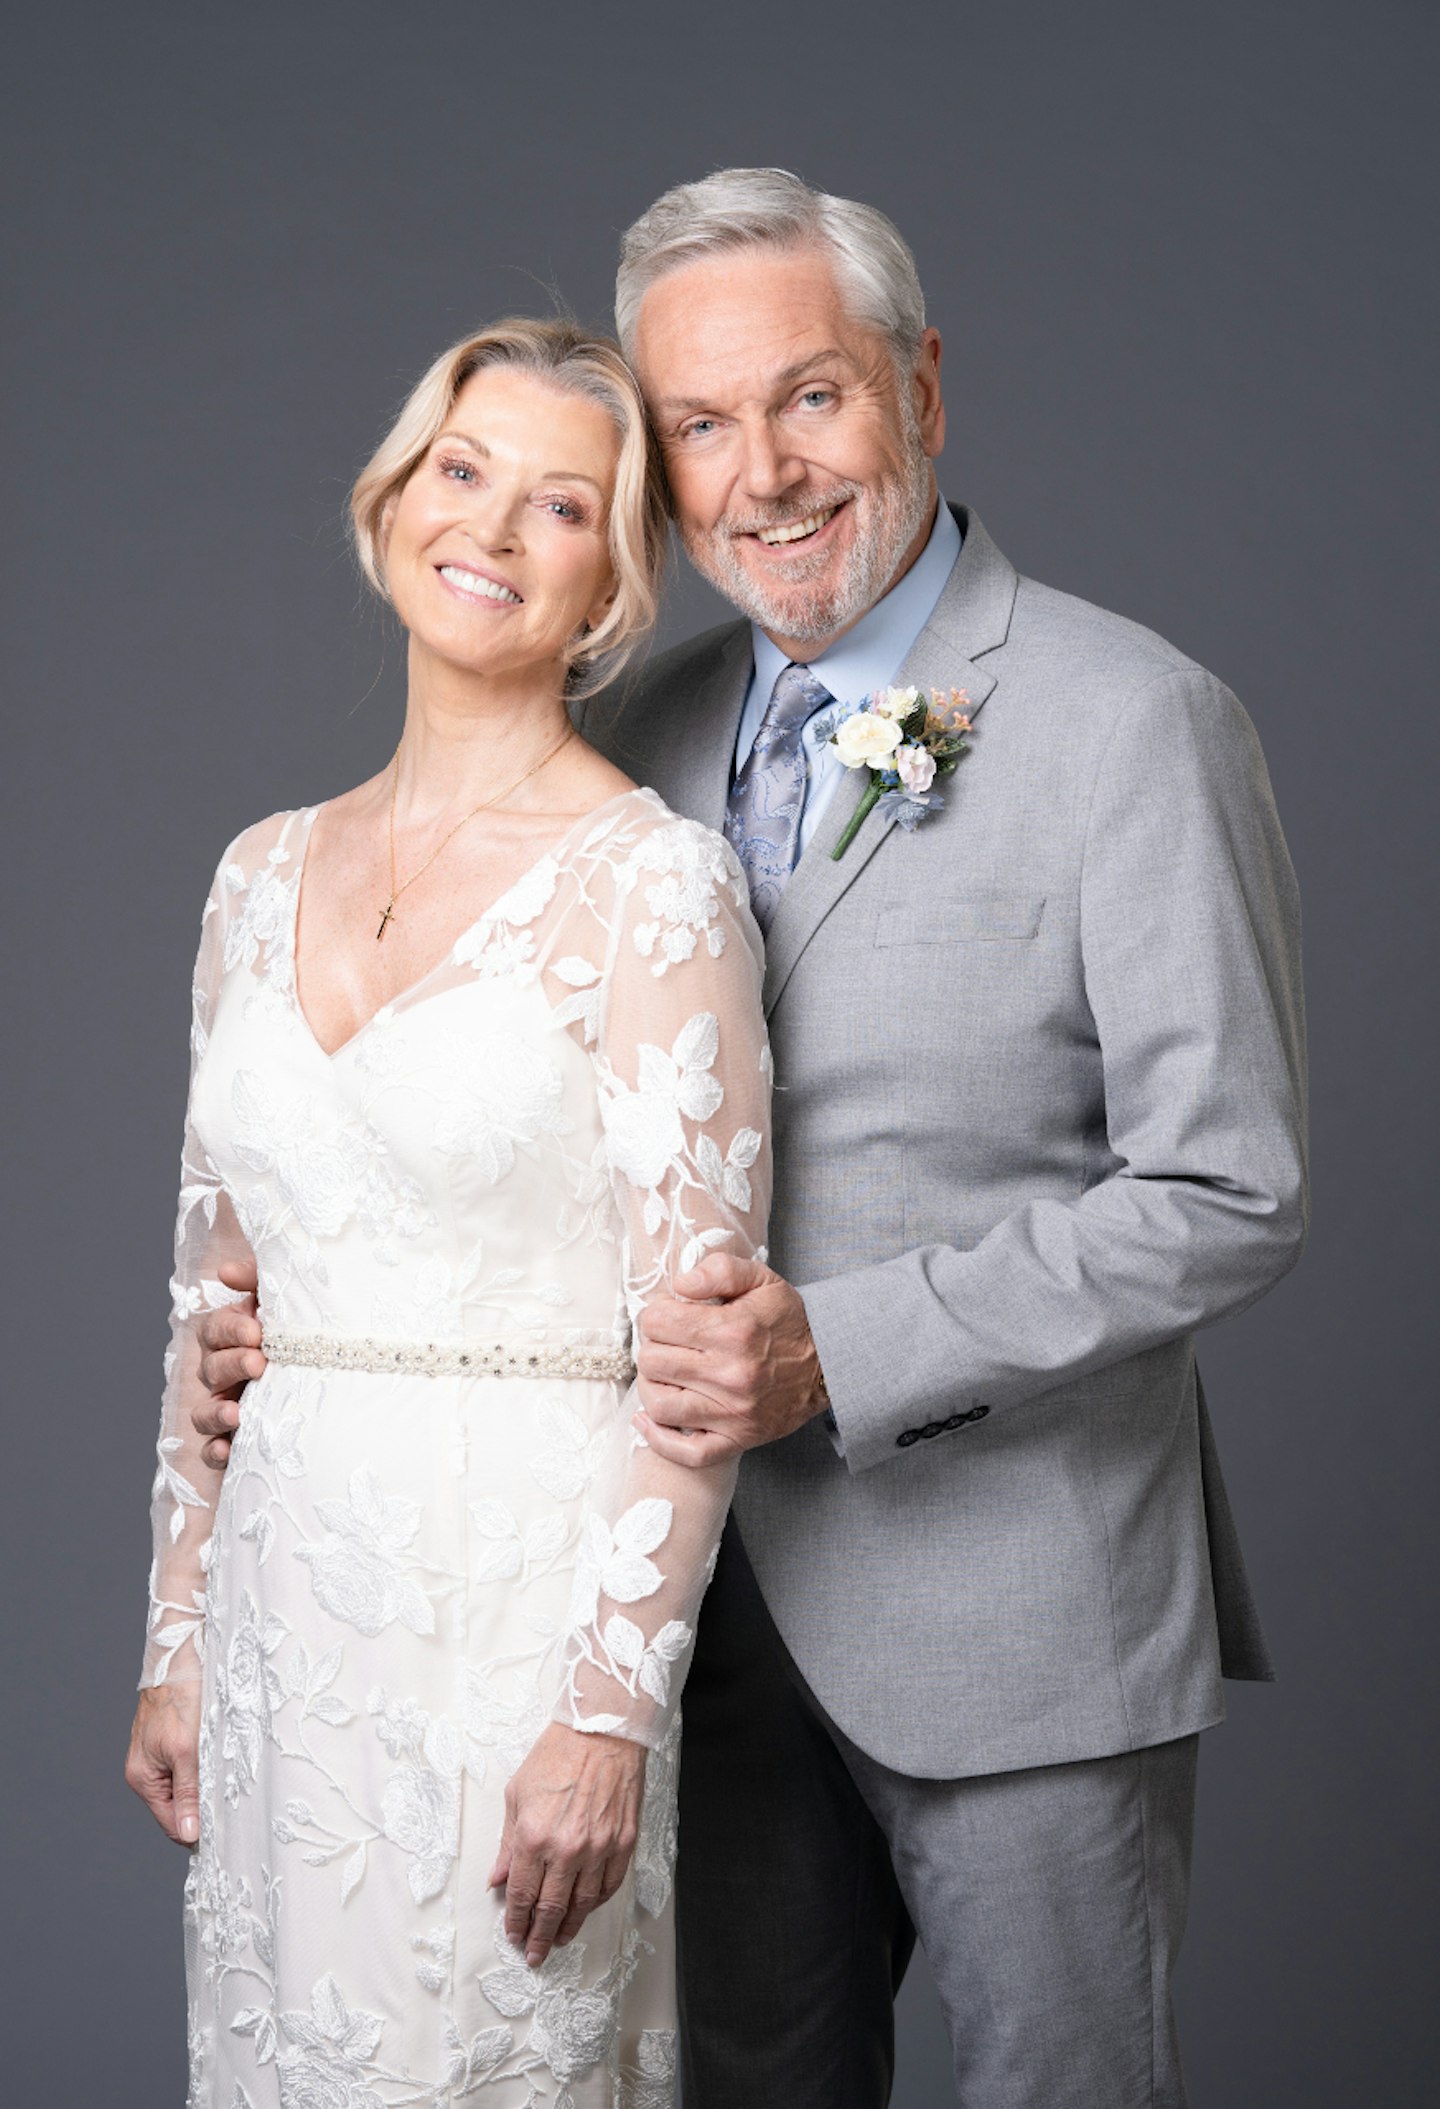 Gillian Taylforth and Brian Conley as Kathy Beale and Rocky Cotton on EastEnders